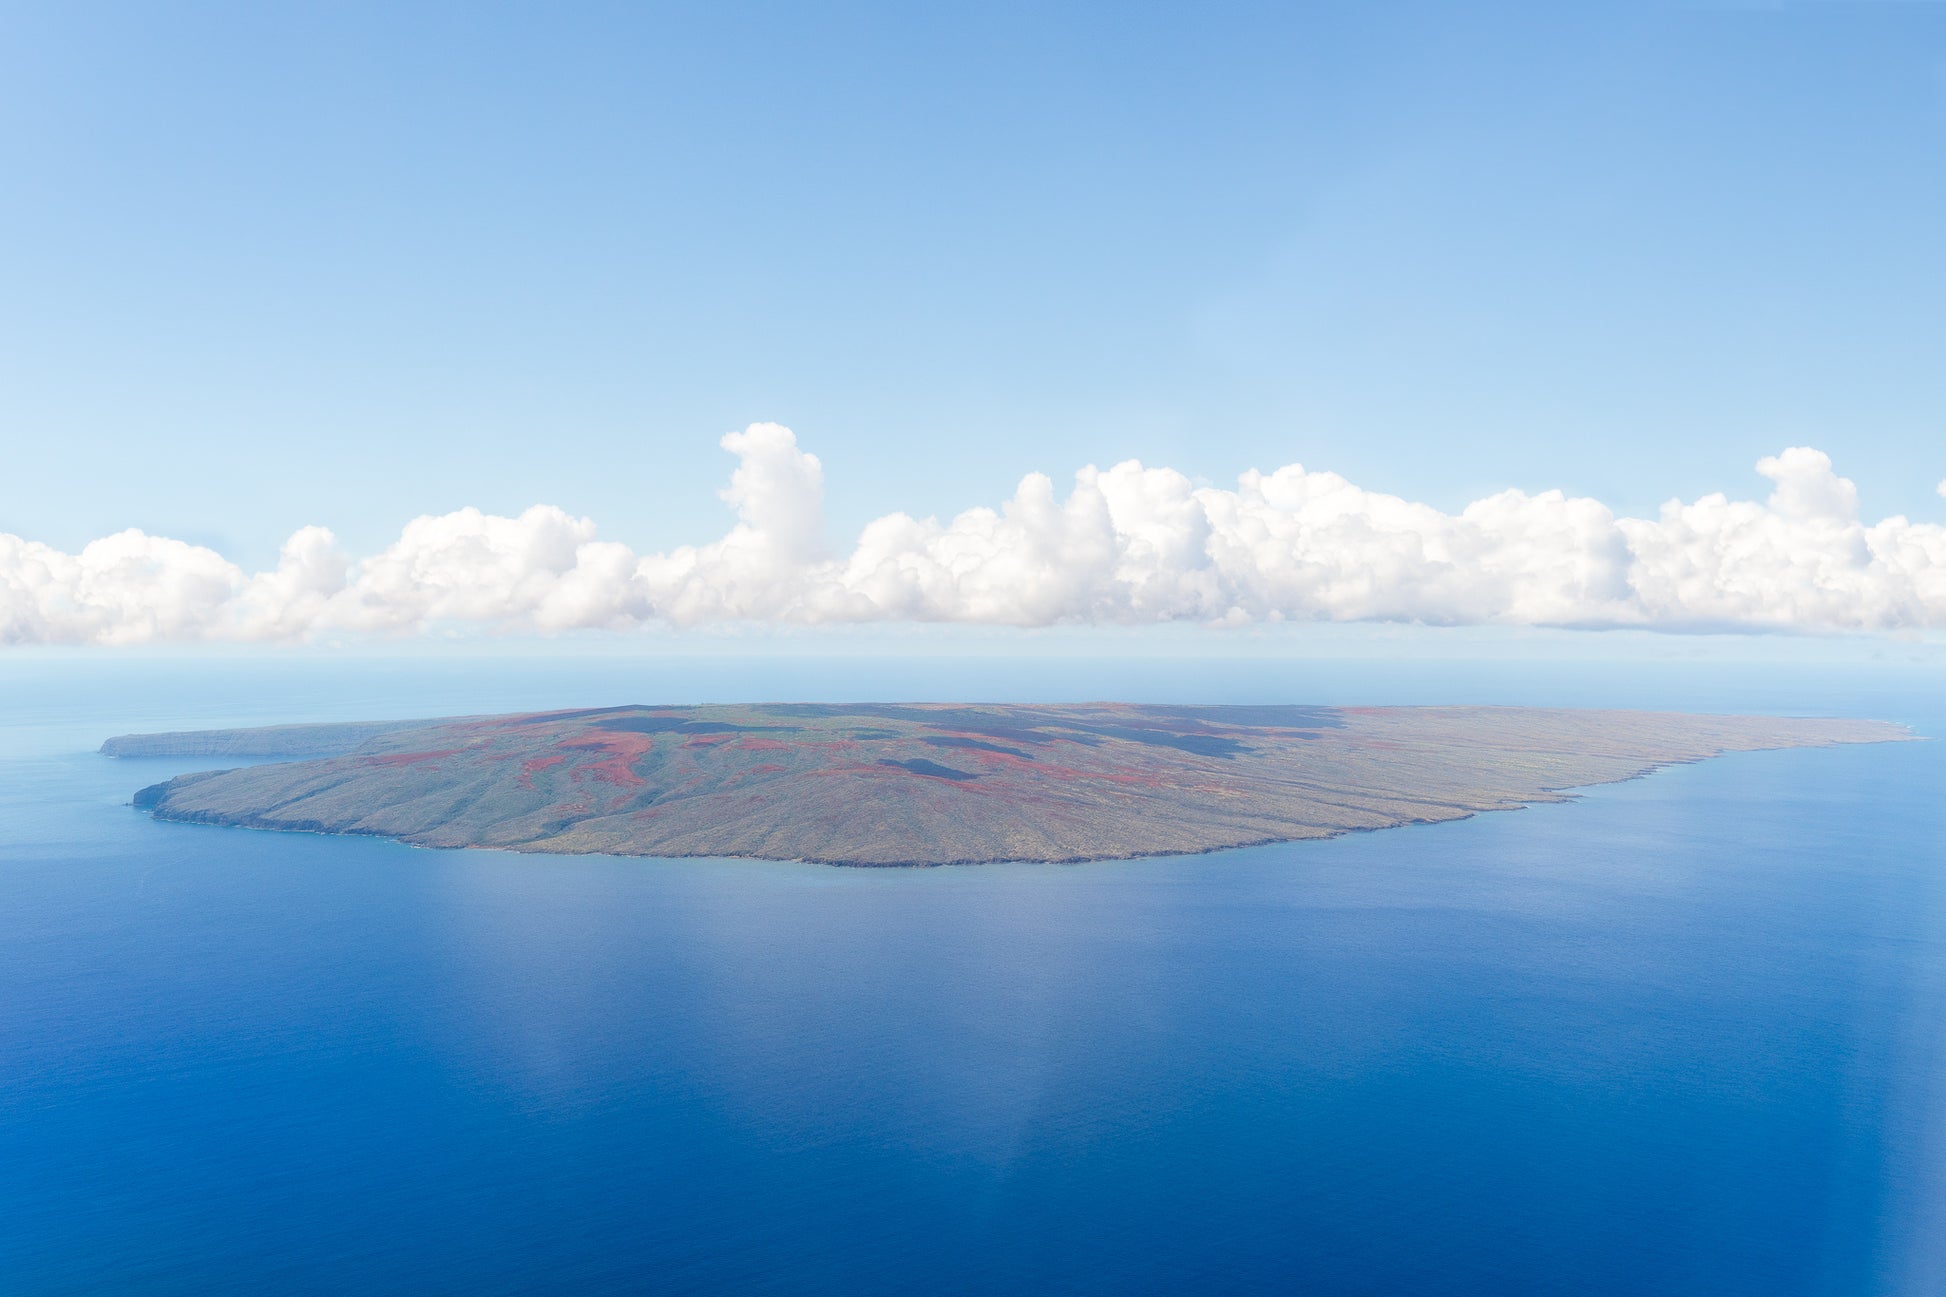 Kahoʻolawe anglicized as Kahoolawe is the smallest of the eight main volcanic islands in the Hawaiian Islands. Kahoʻolawe is located about seven miles southwest of Maui and also southeast of Lānaʻi